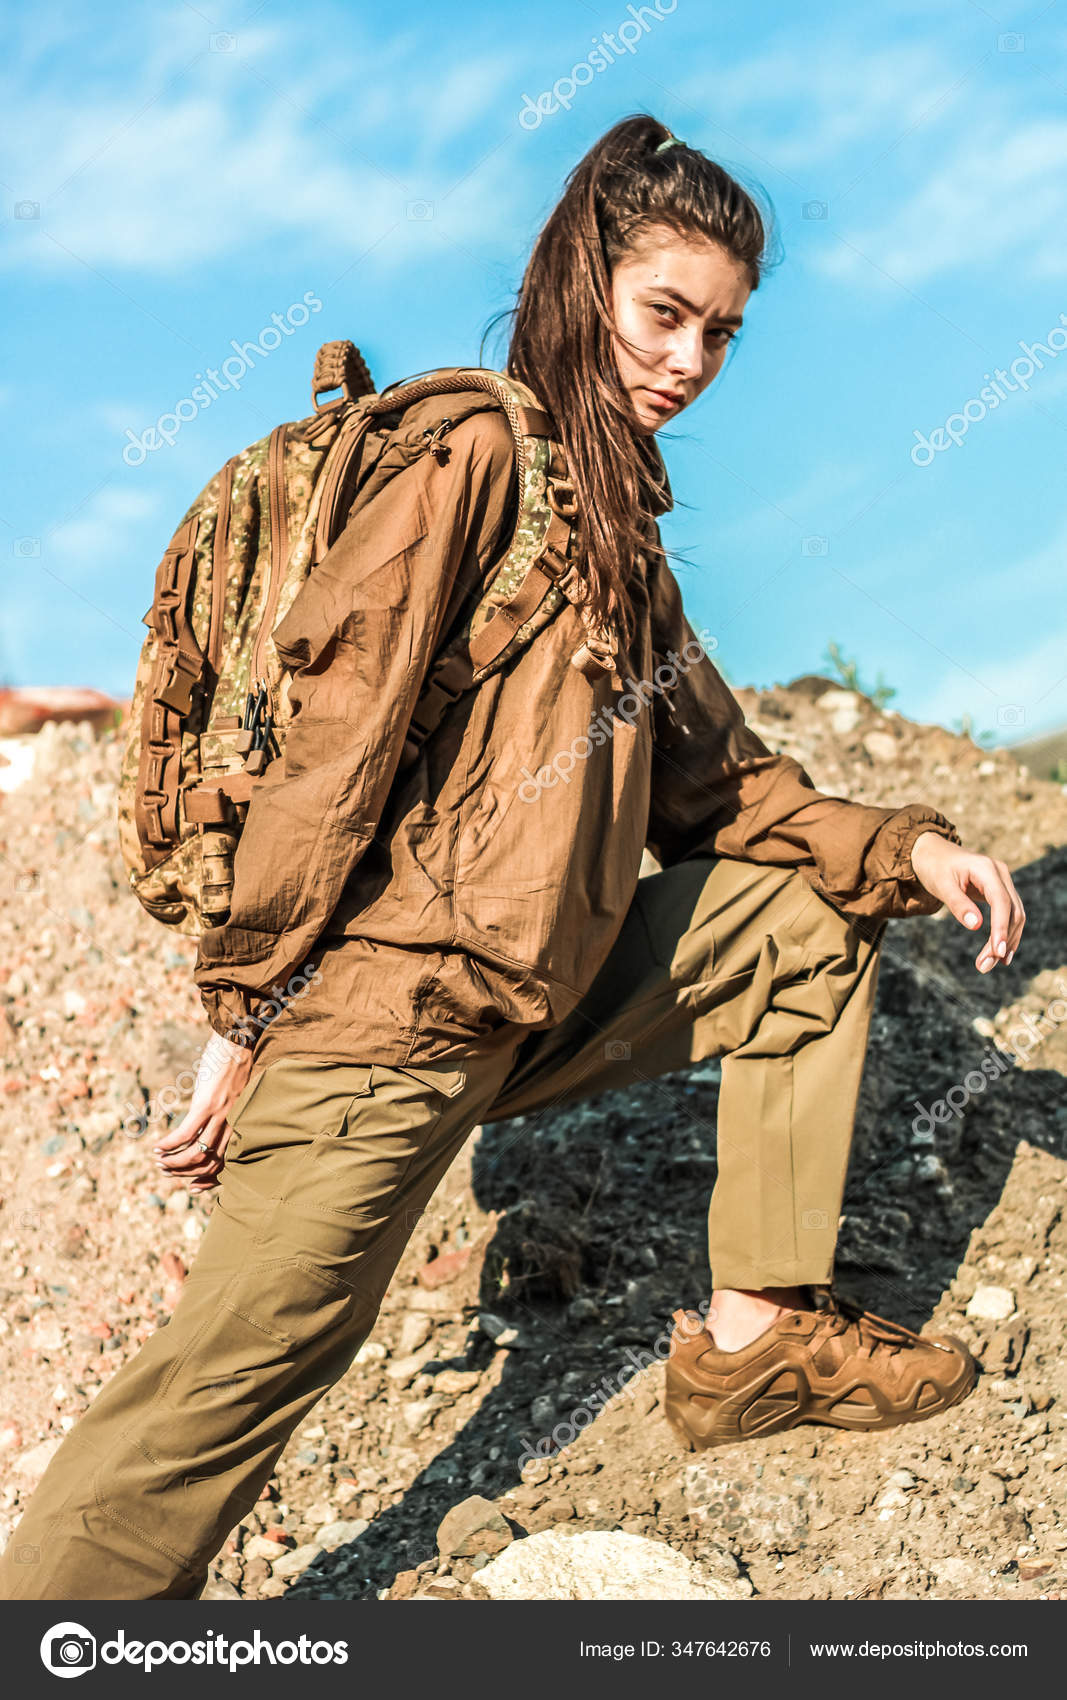 Girl Tactical Clothing Military Woman Camouflage Jungle Adventure